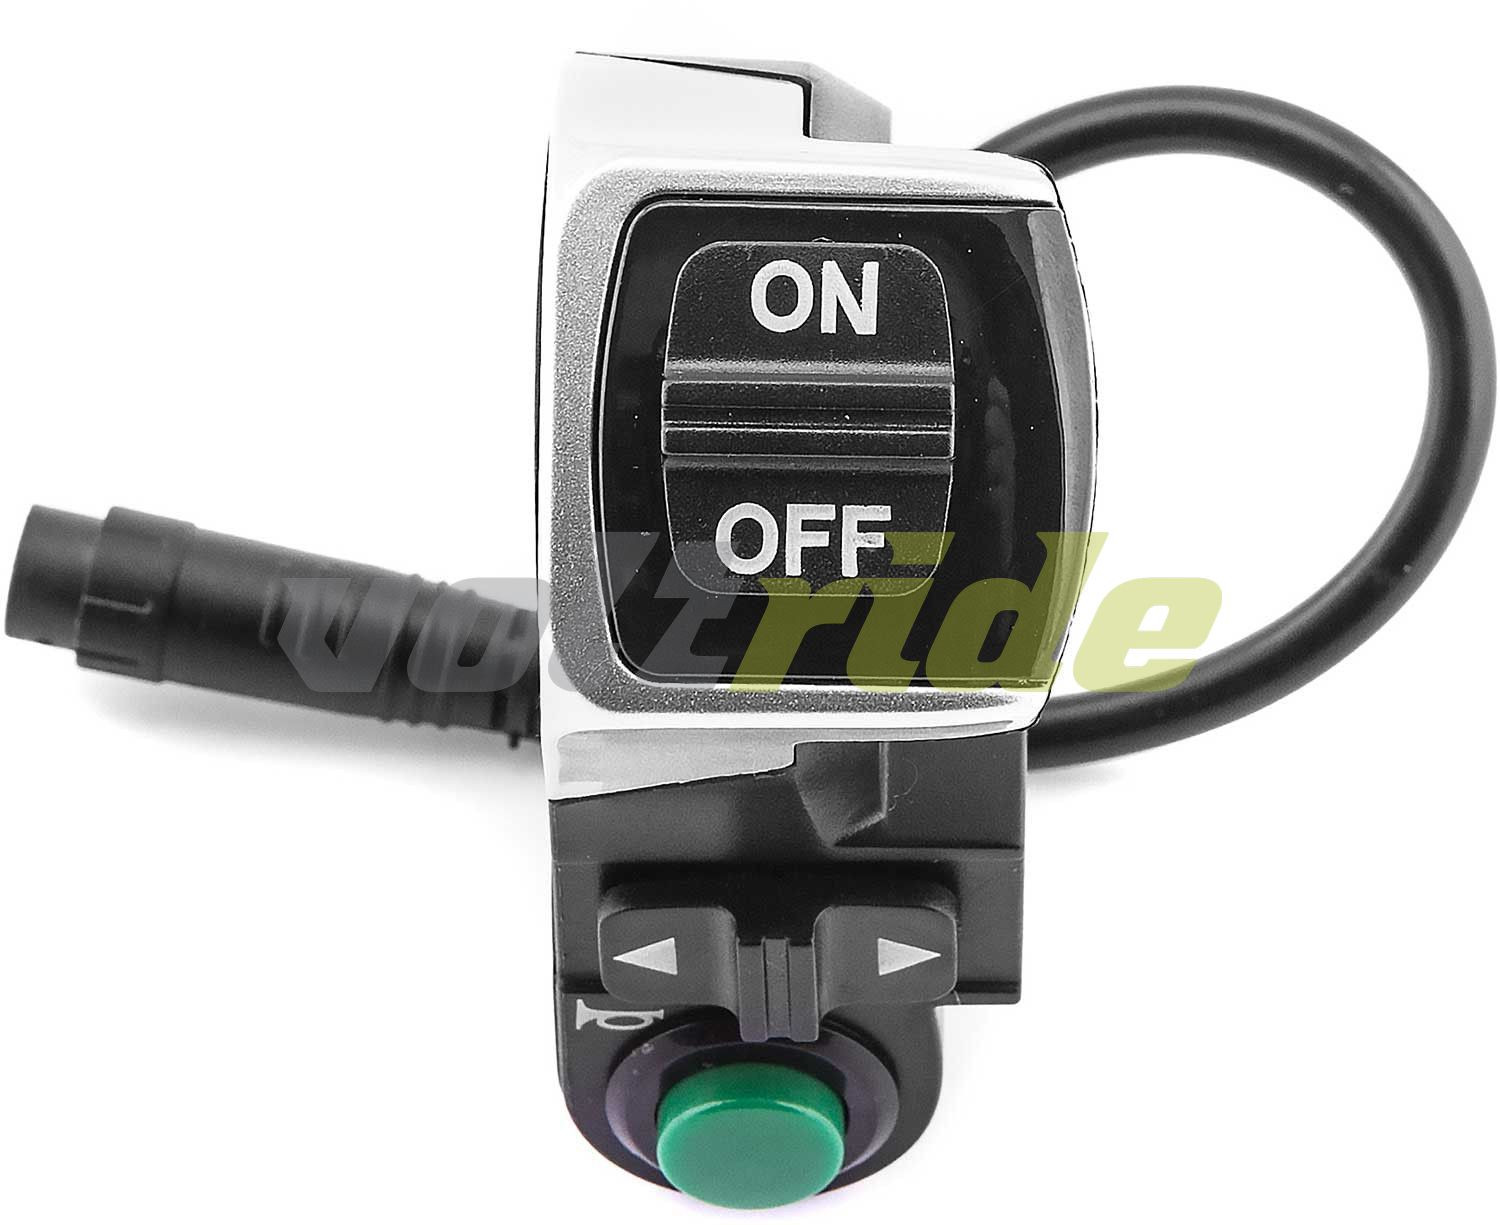 SXT Combination switch (light, turn signal and horn)